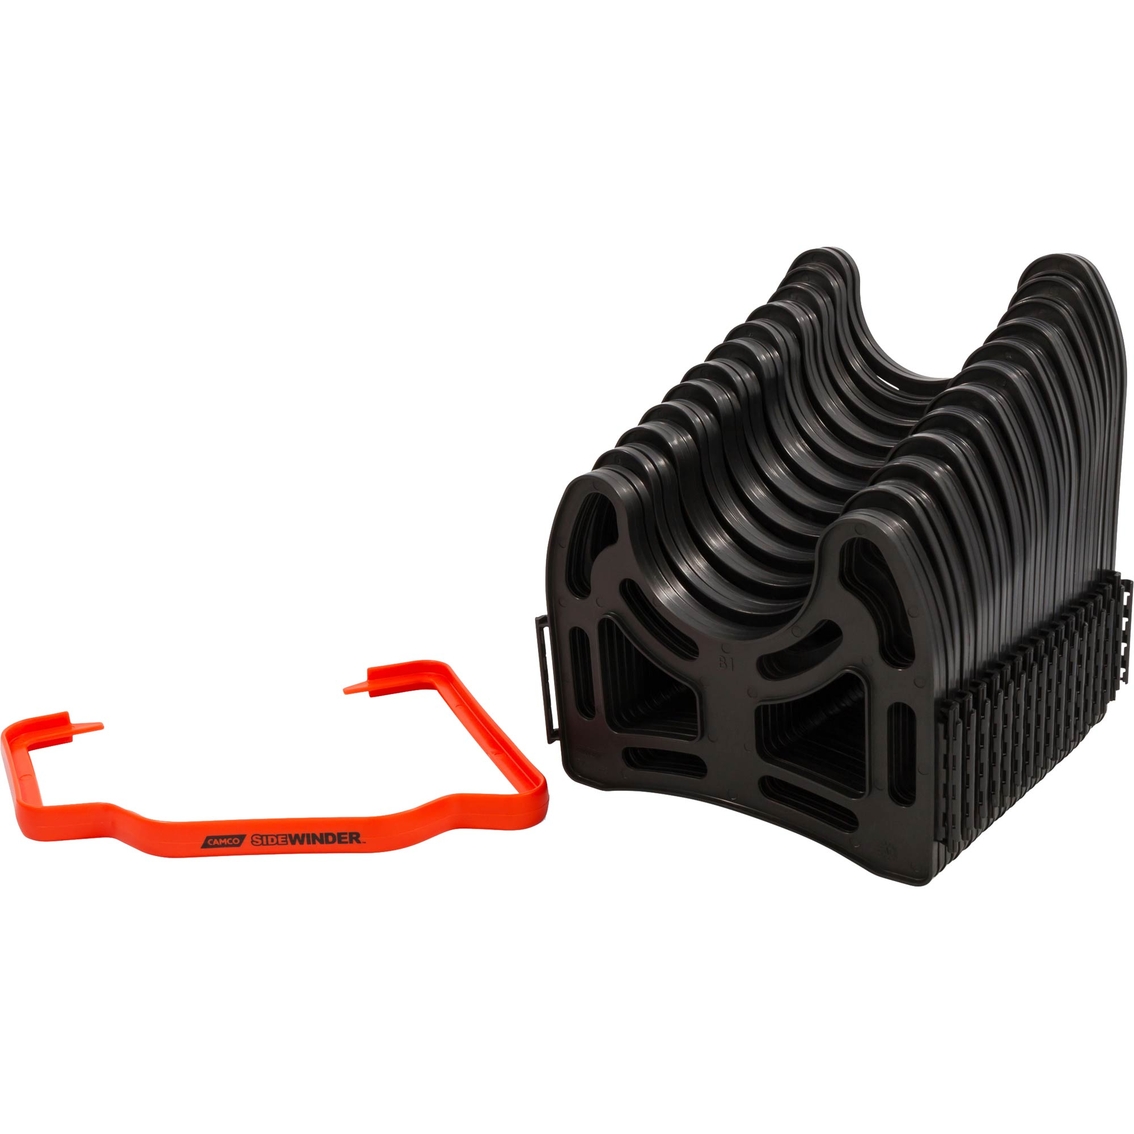 Camco Sidewinder 15 ft. Plastic Sewer Hose Support - Image 4 of 8